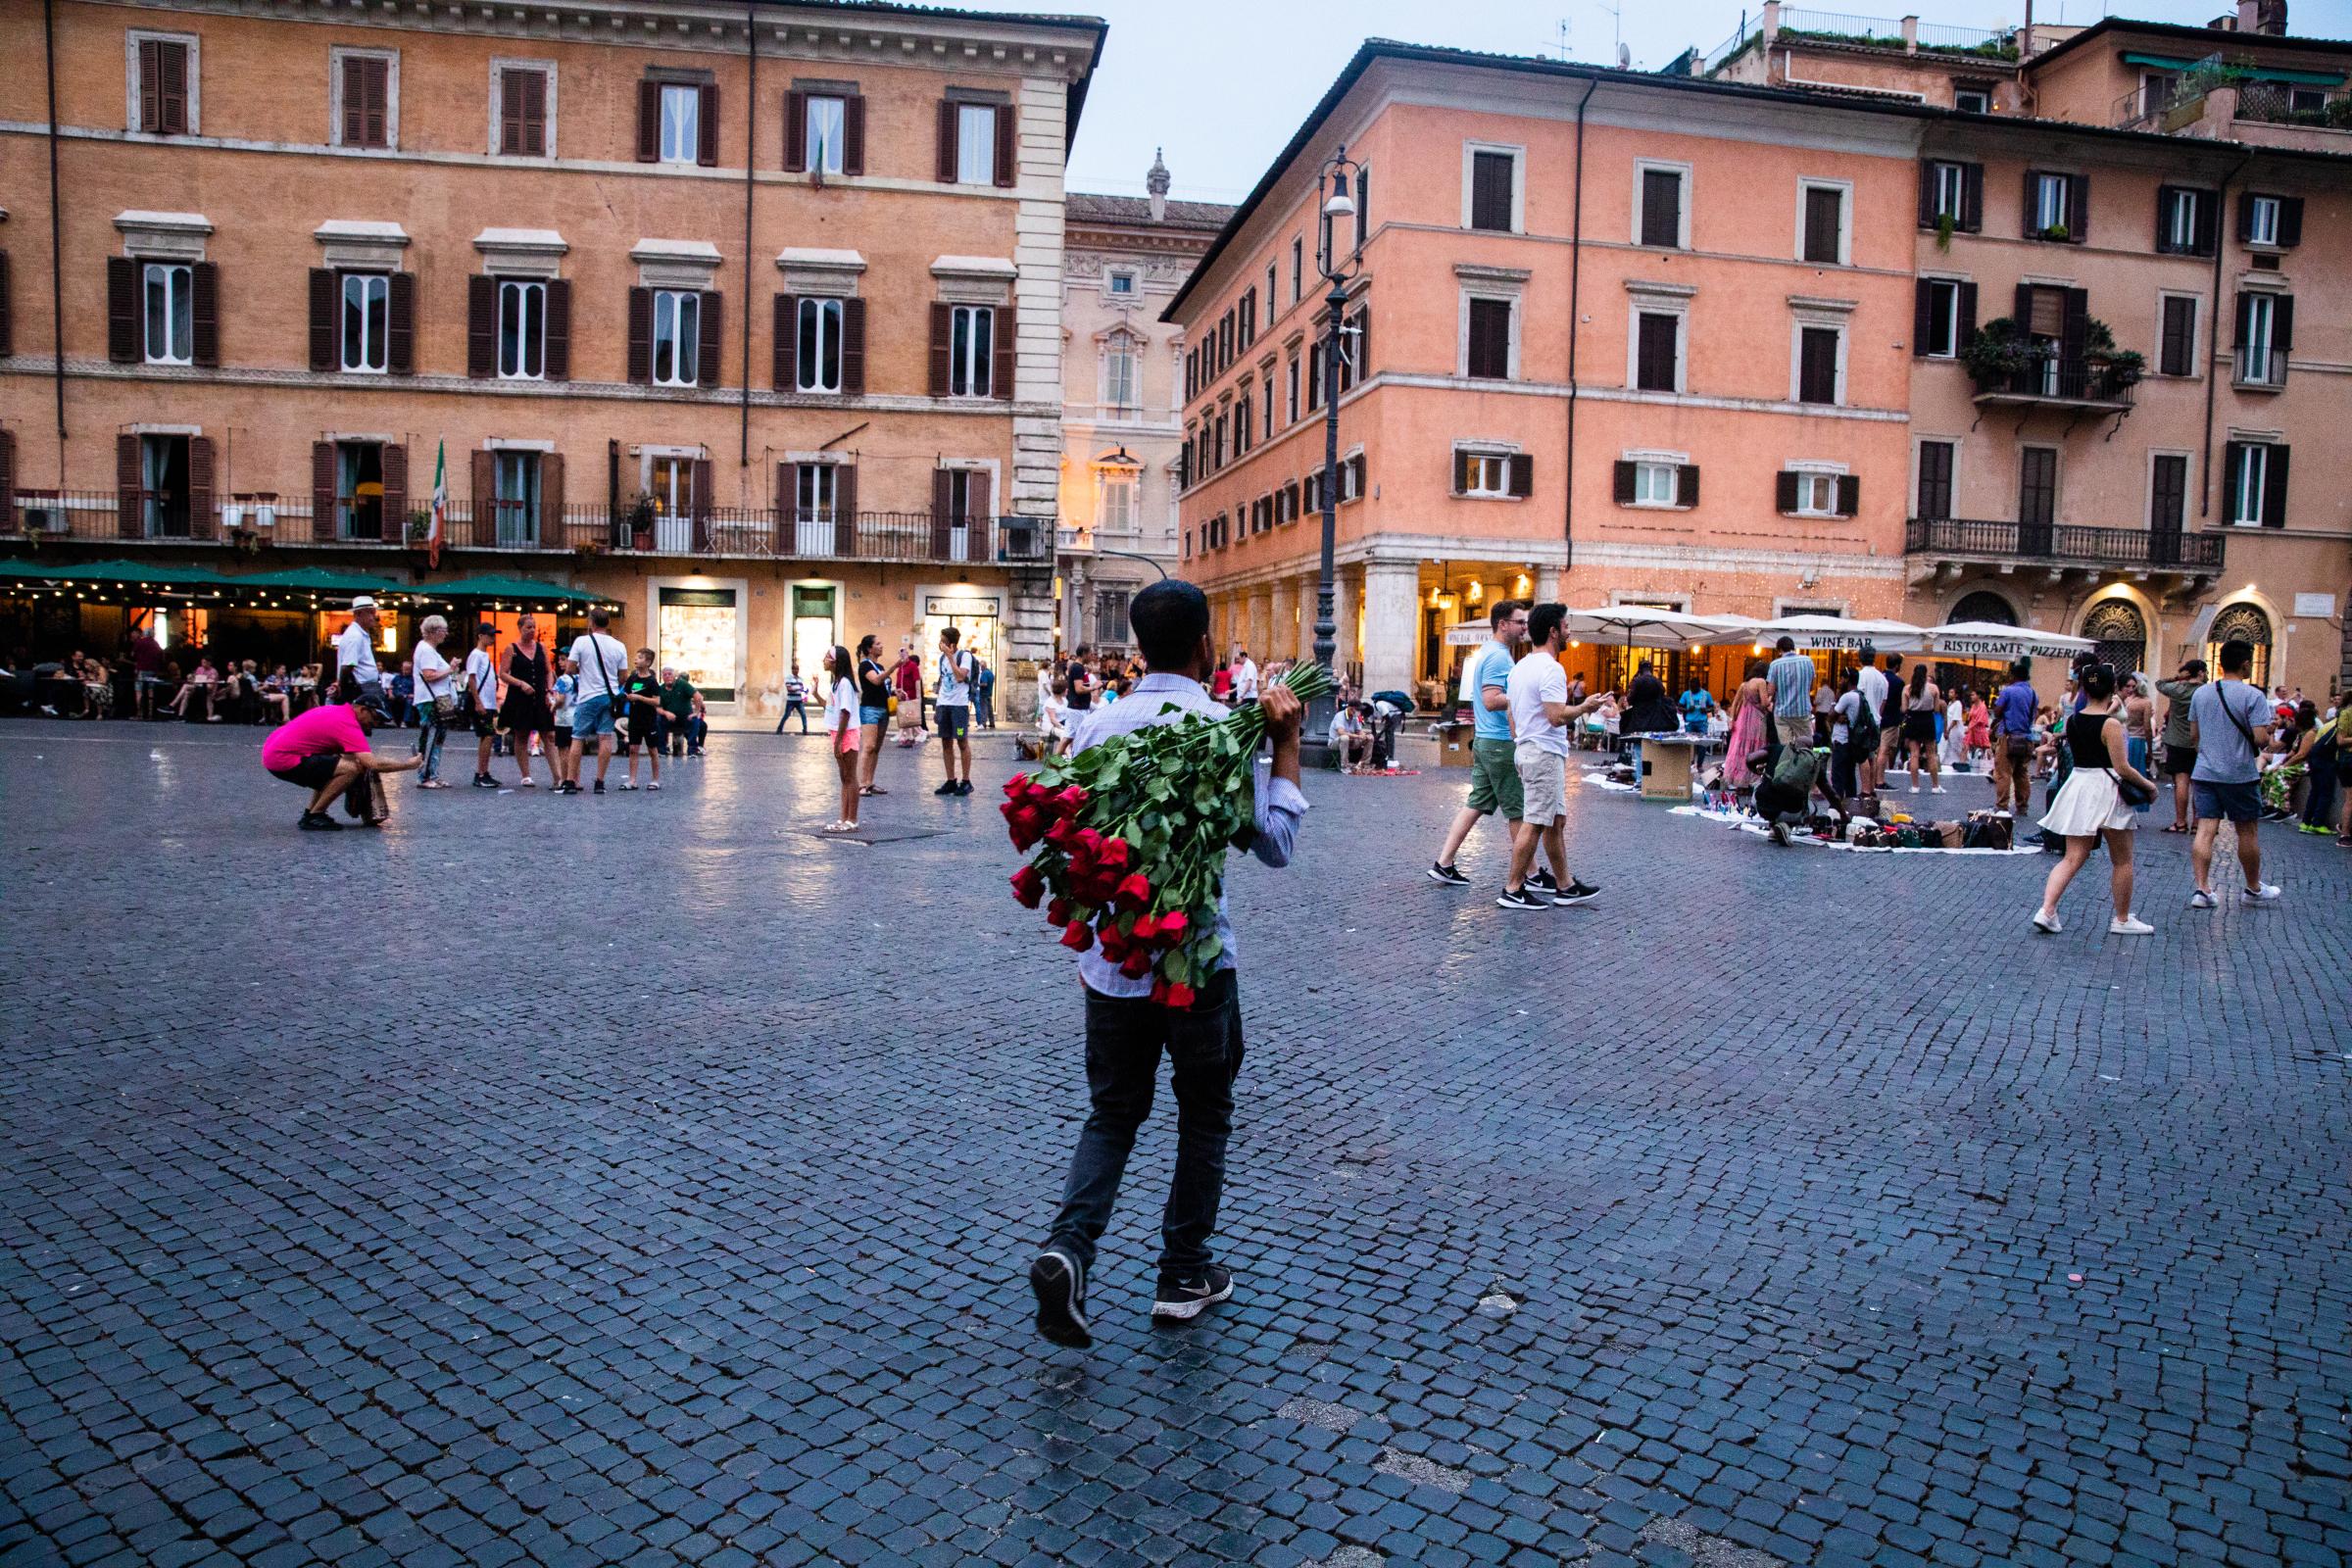 That Bad Boy Rome - A First-timer's Perspective - A man sells roses along the Piazza Navona in Rome.